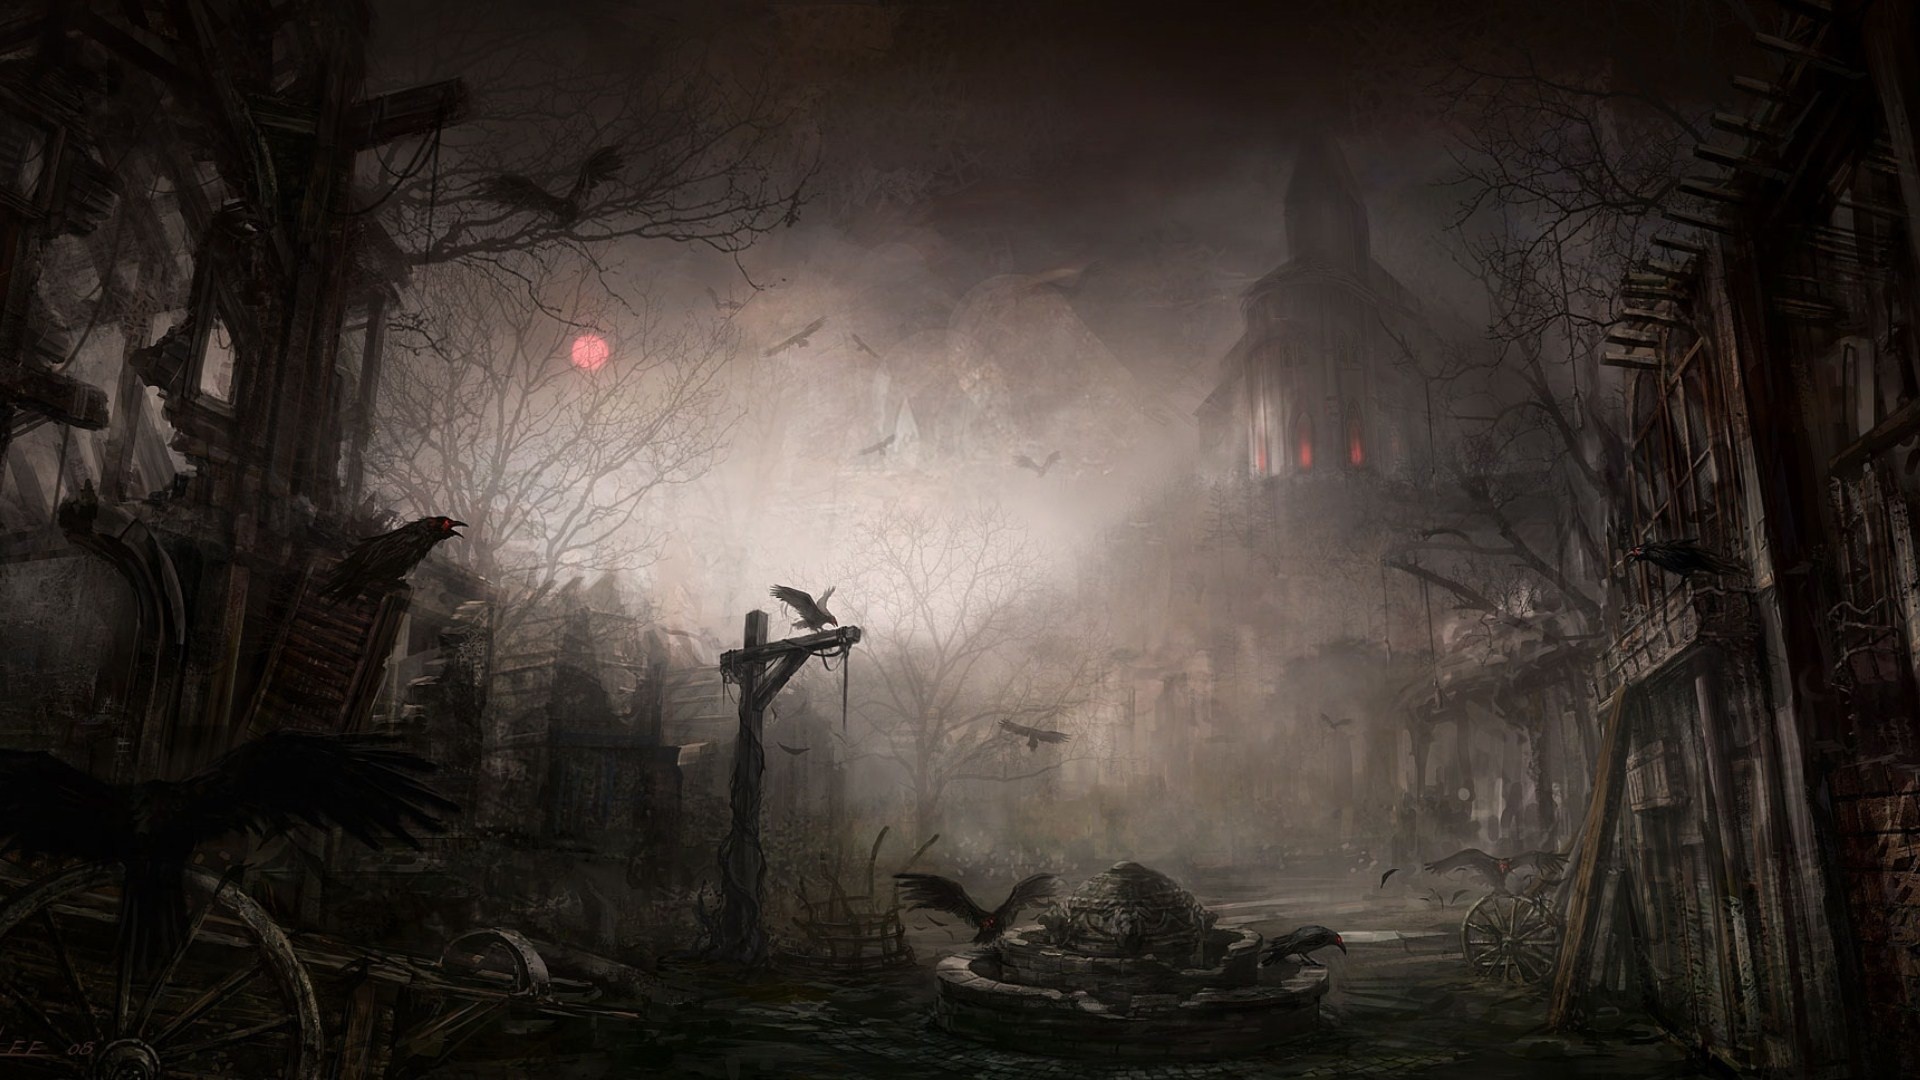 1920x1080 ... 27 Scary Backgrounds, Wallpapers, Images, Pictures | Design ... Scary  Desktop Wallpaper ...